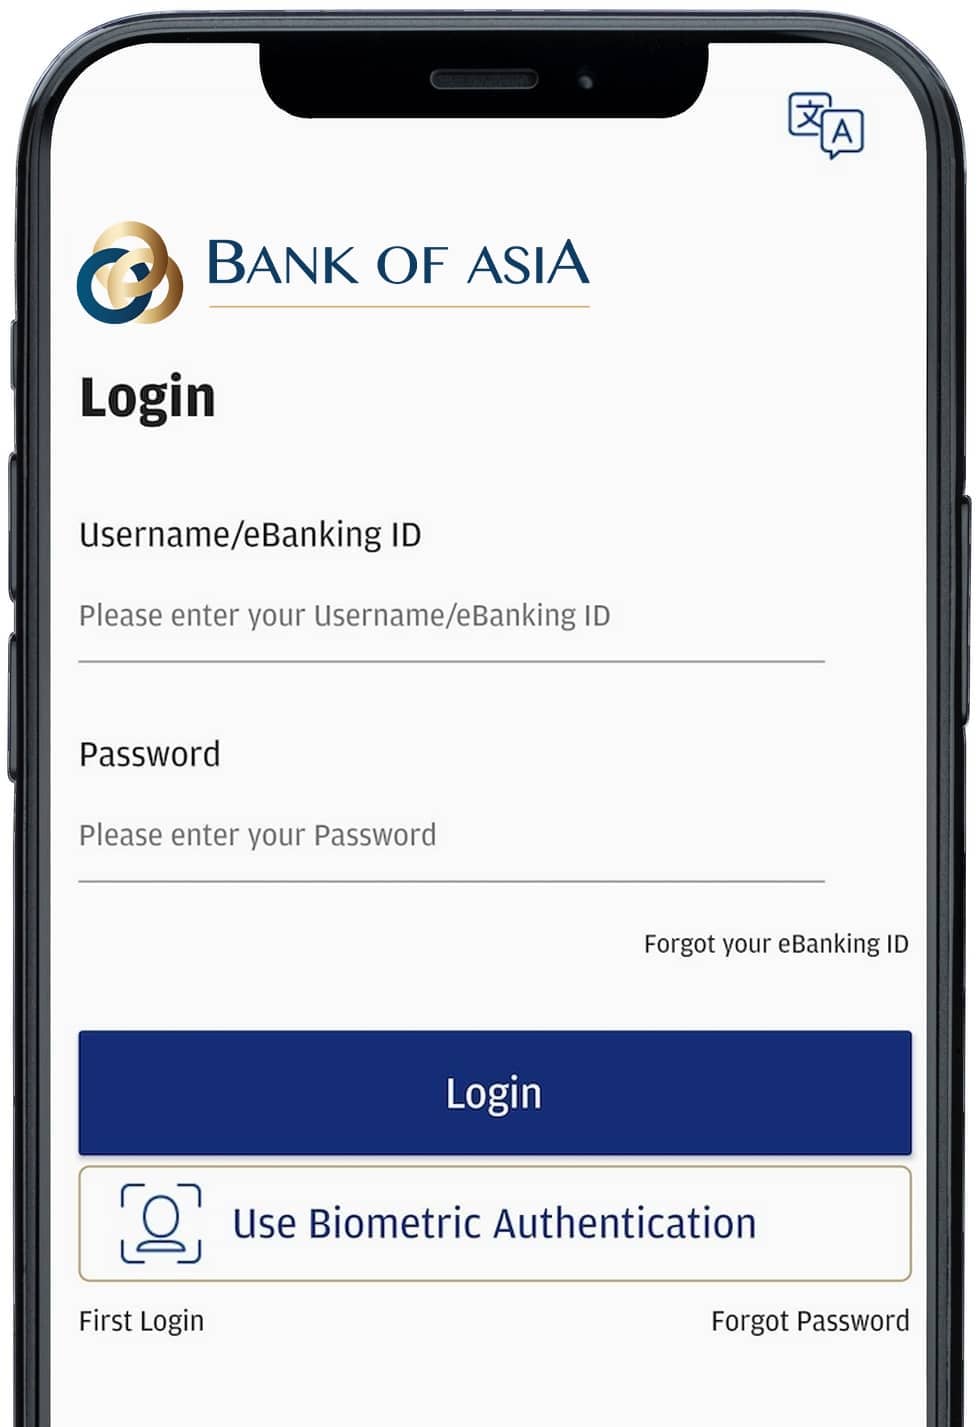 Bank of Asia Mobile Banking App